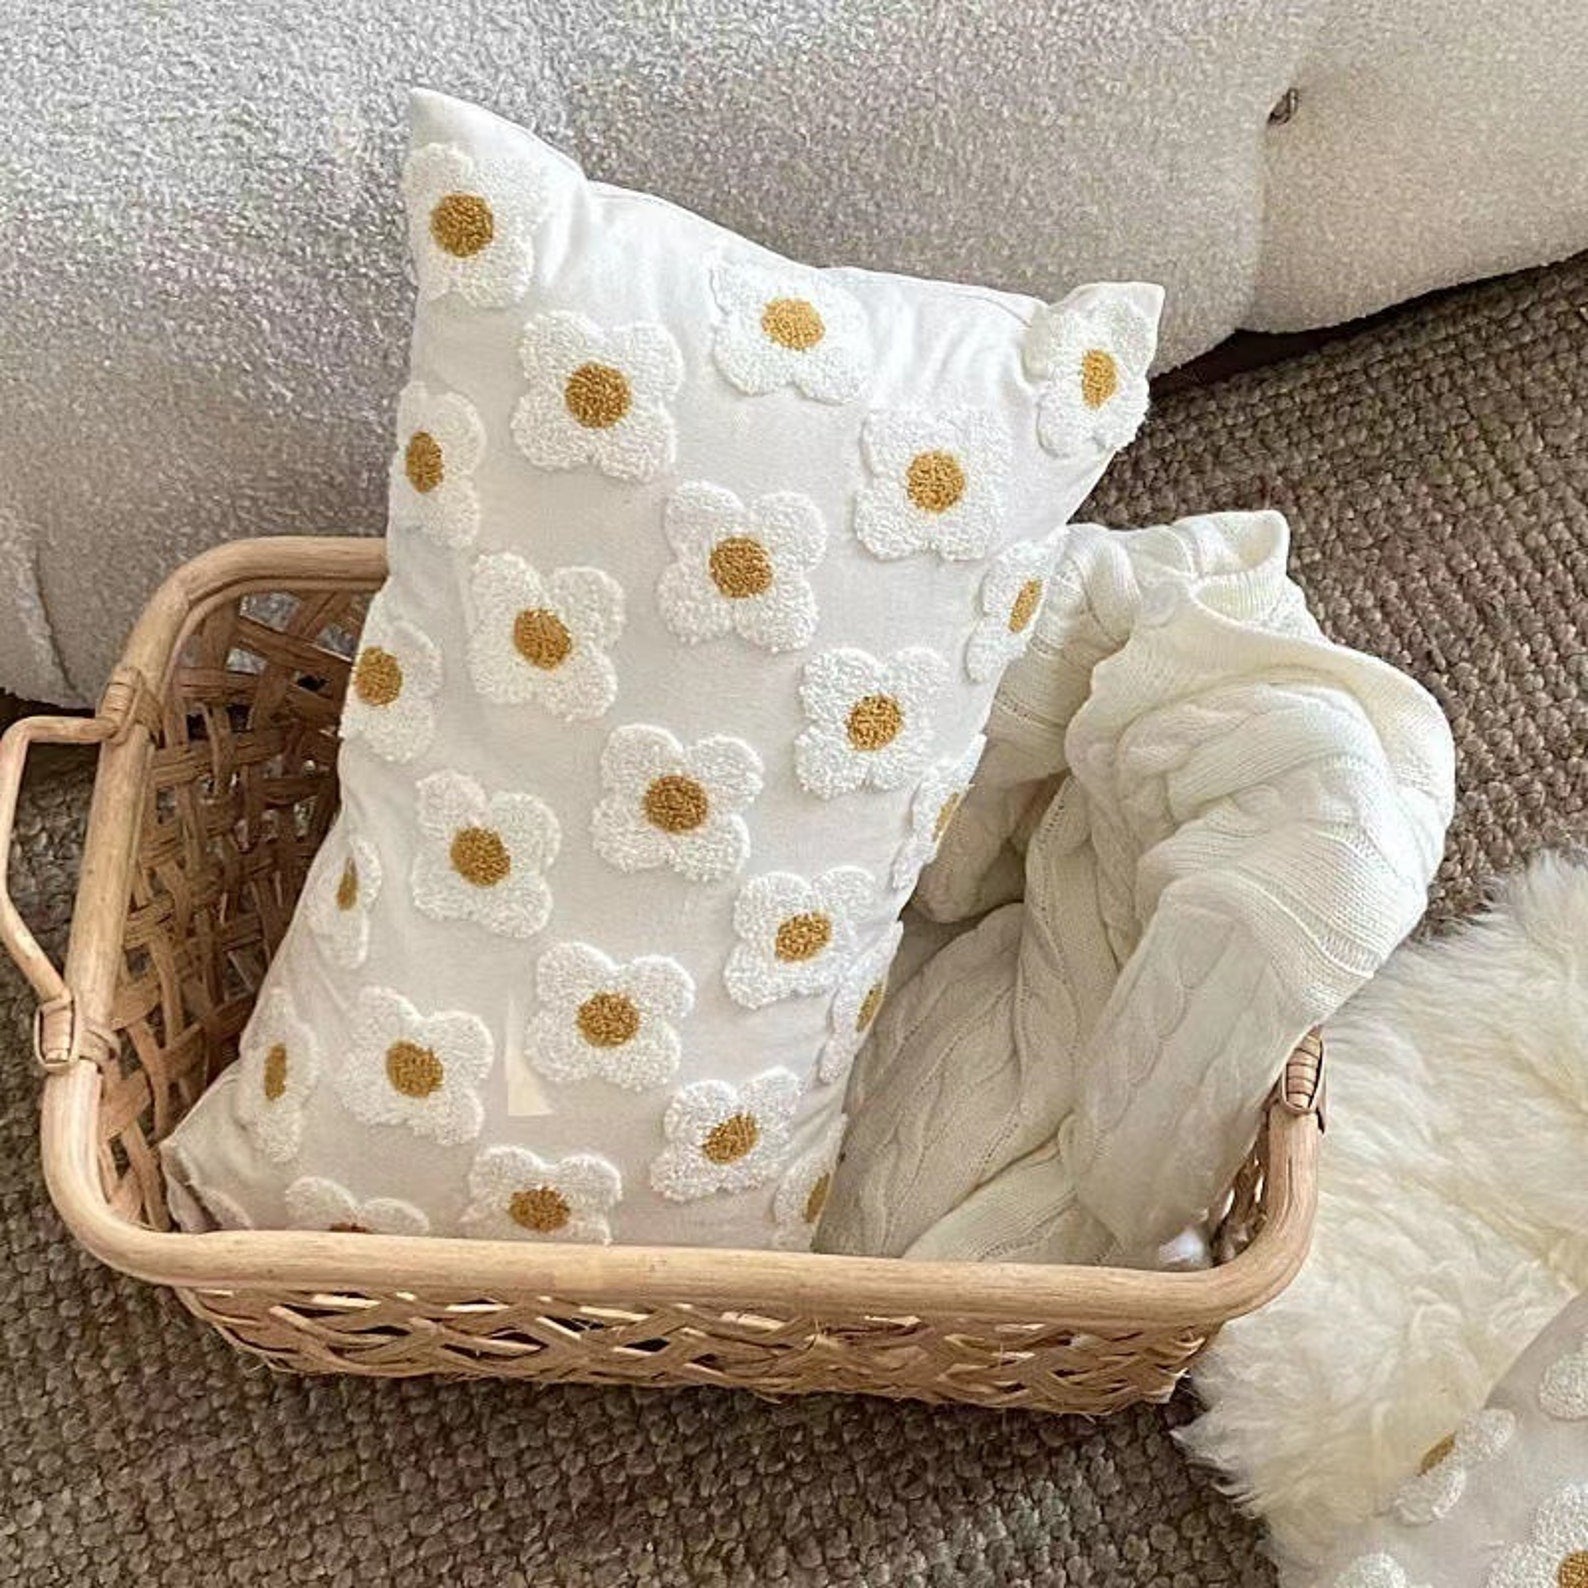 Vintage Daisy Pattern Pillowcase, Cute Flower Pillow Cover, Bedroom Living Room Home Decor